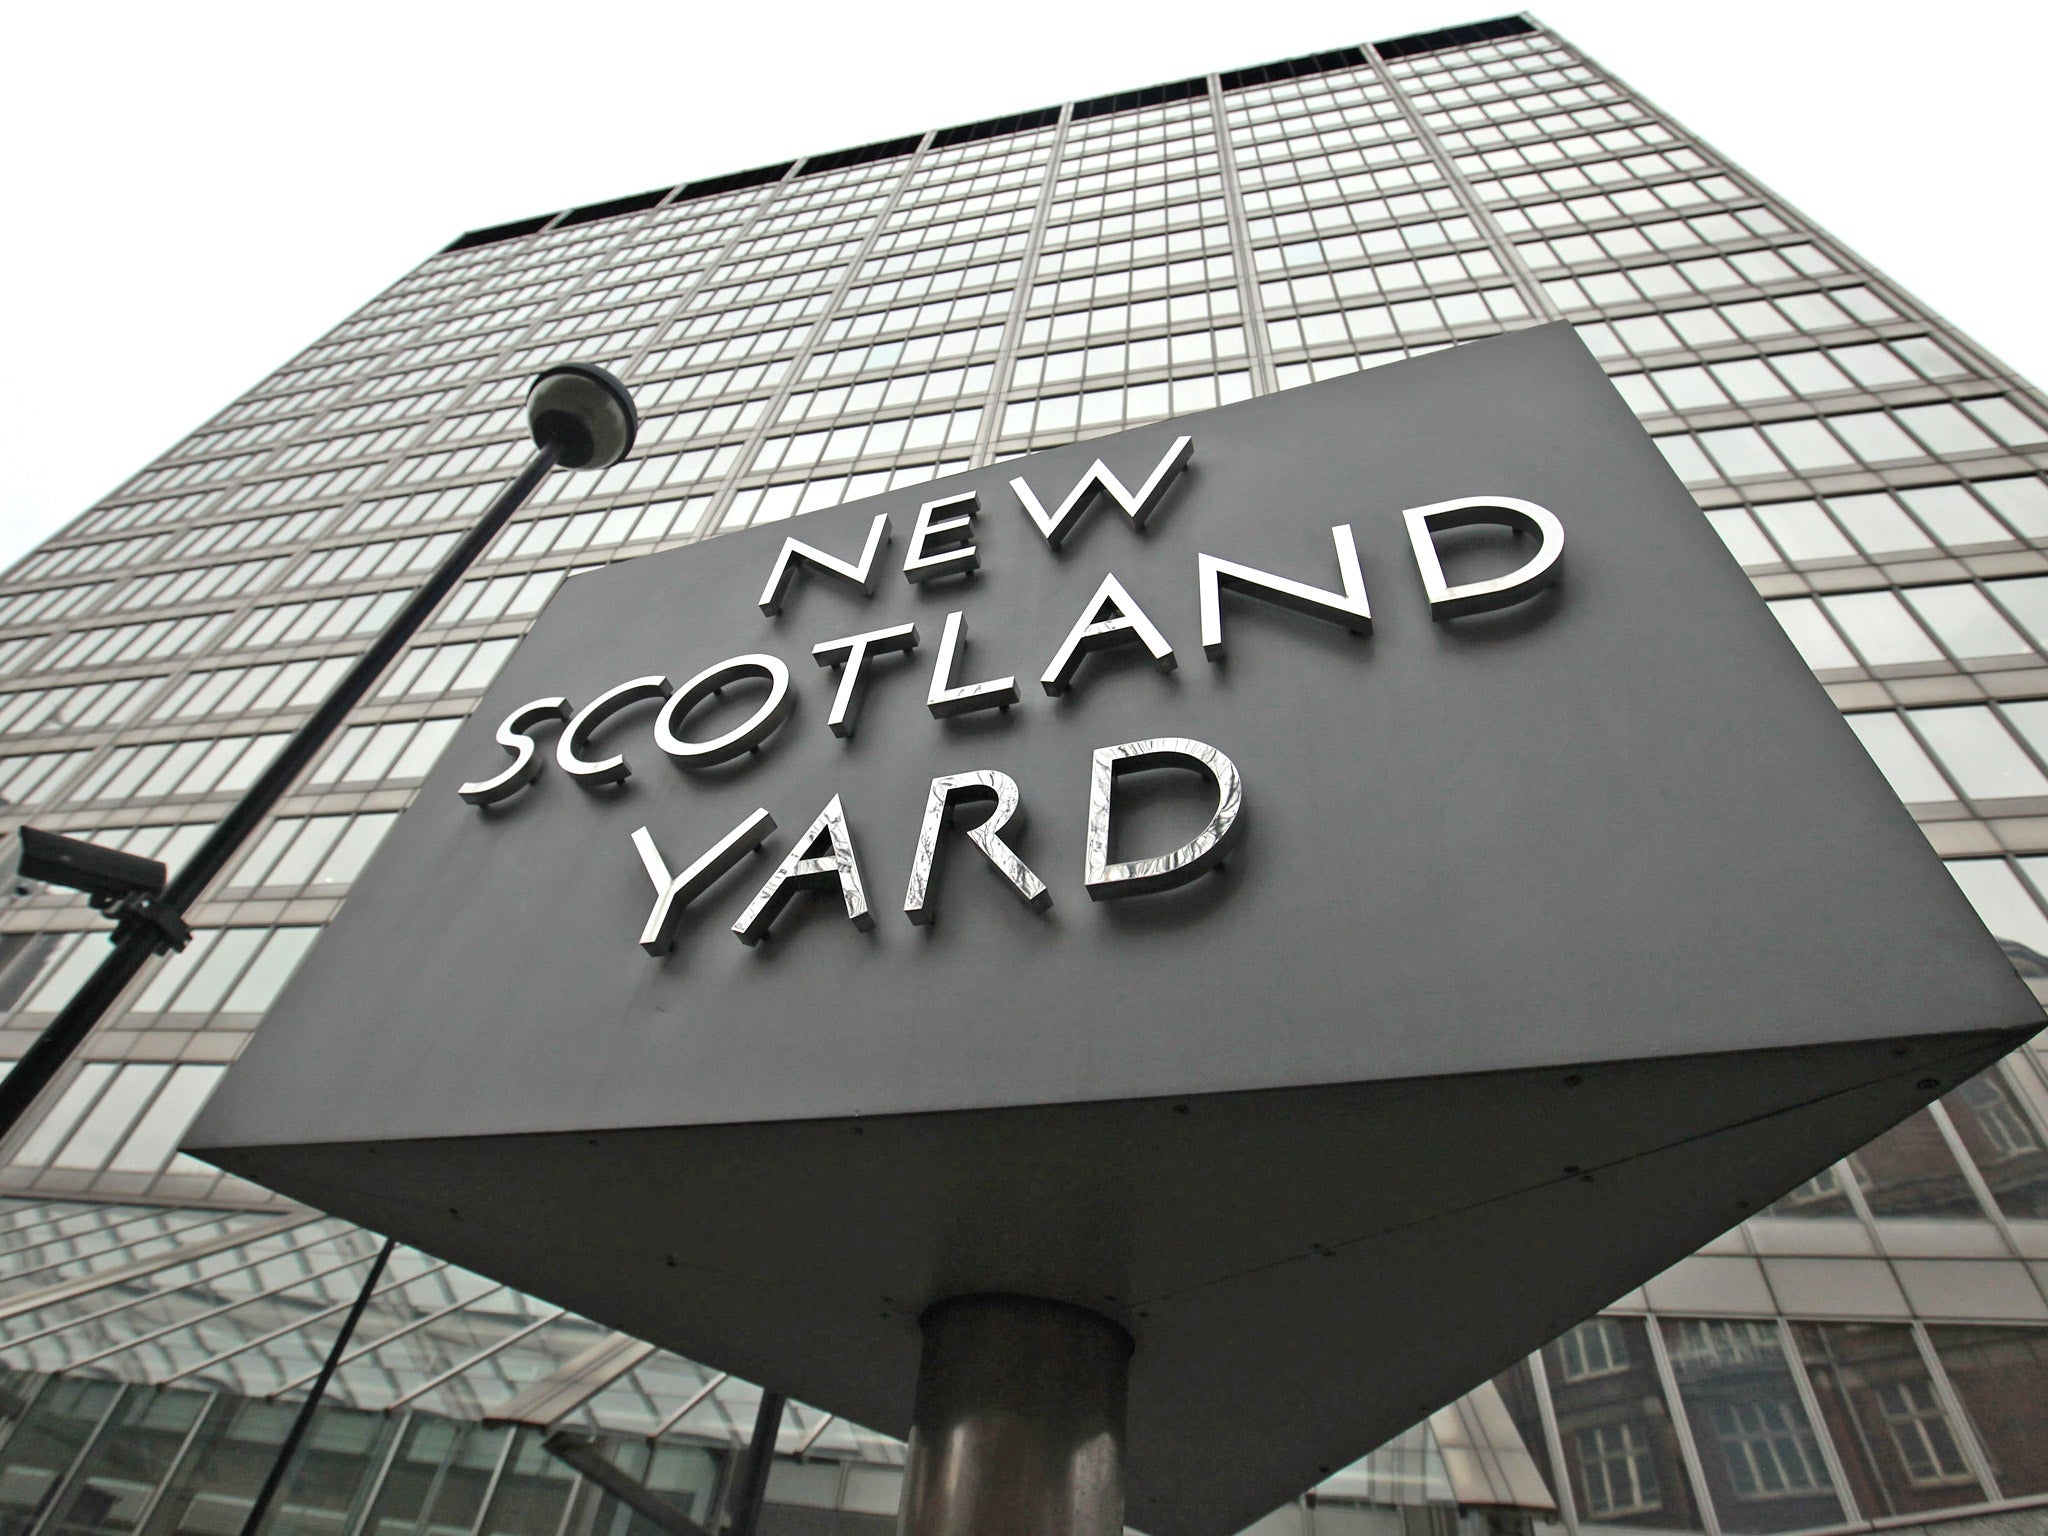 Scotland Yard let staff ‘resign to avoid justice’